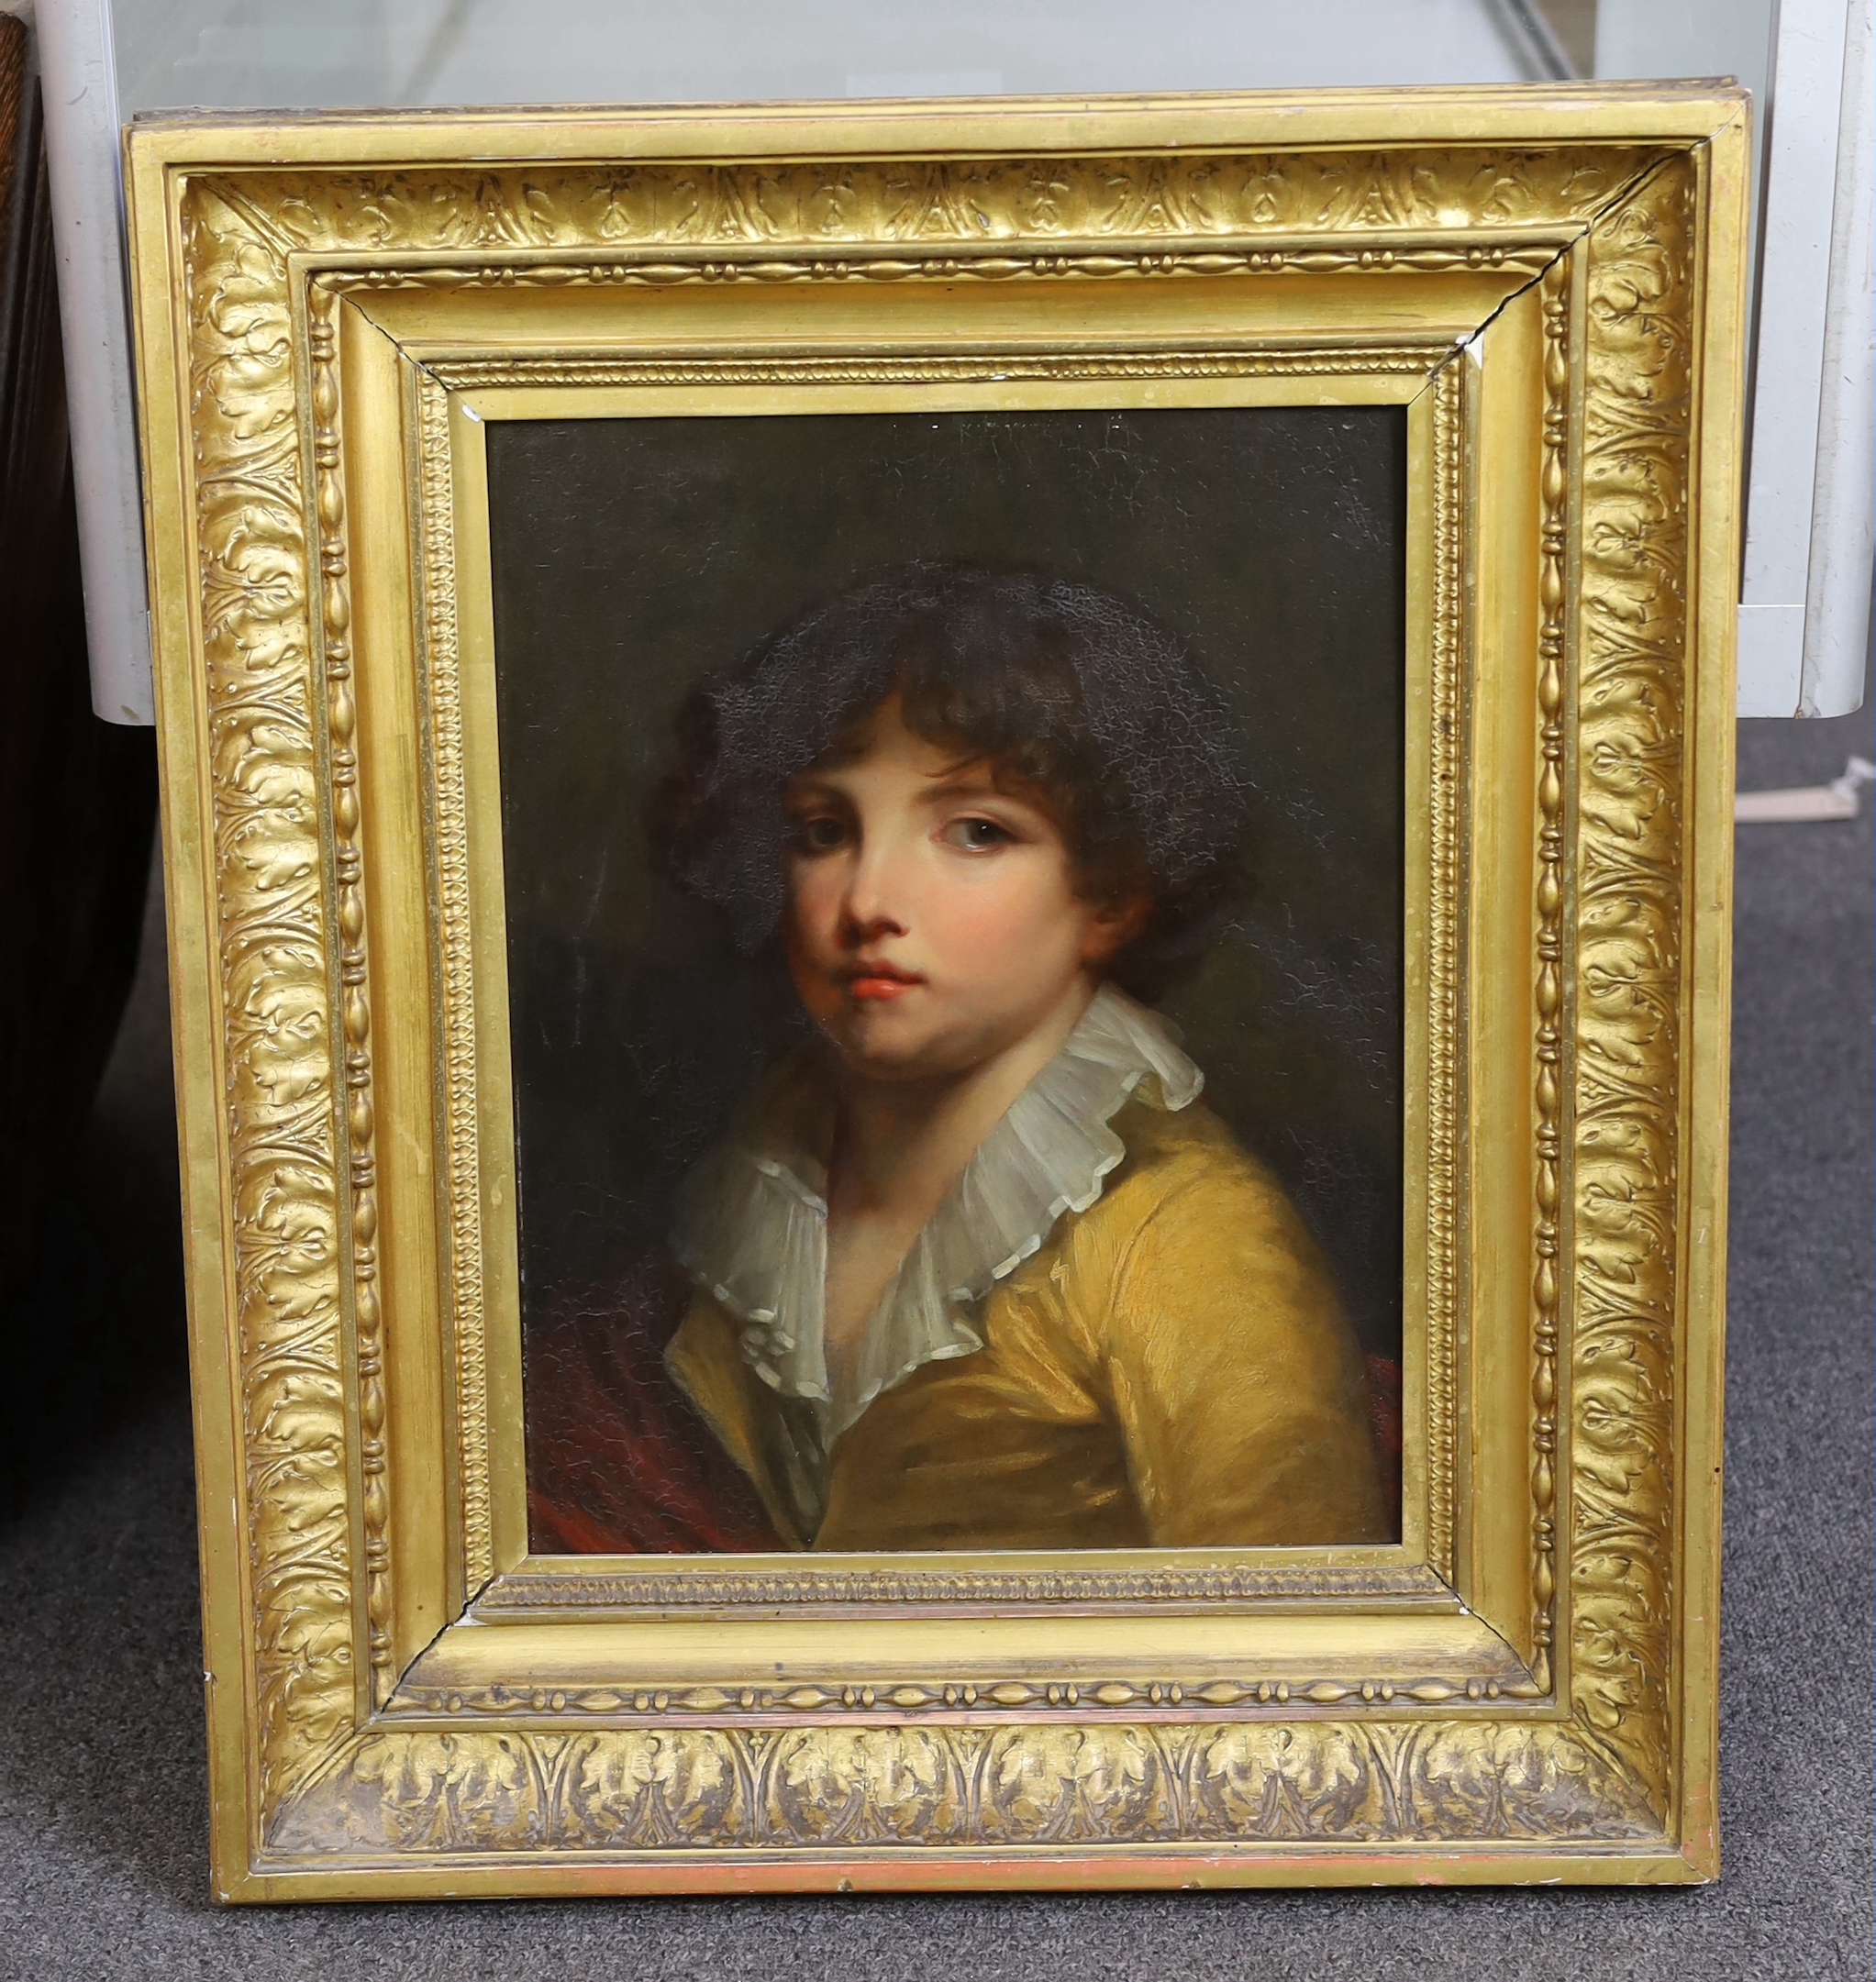 19th century Continental School Portrait of a youth wearing a yellow jacketoil on wooden panel39 x - Bild 2 aus 3